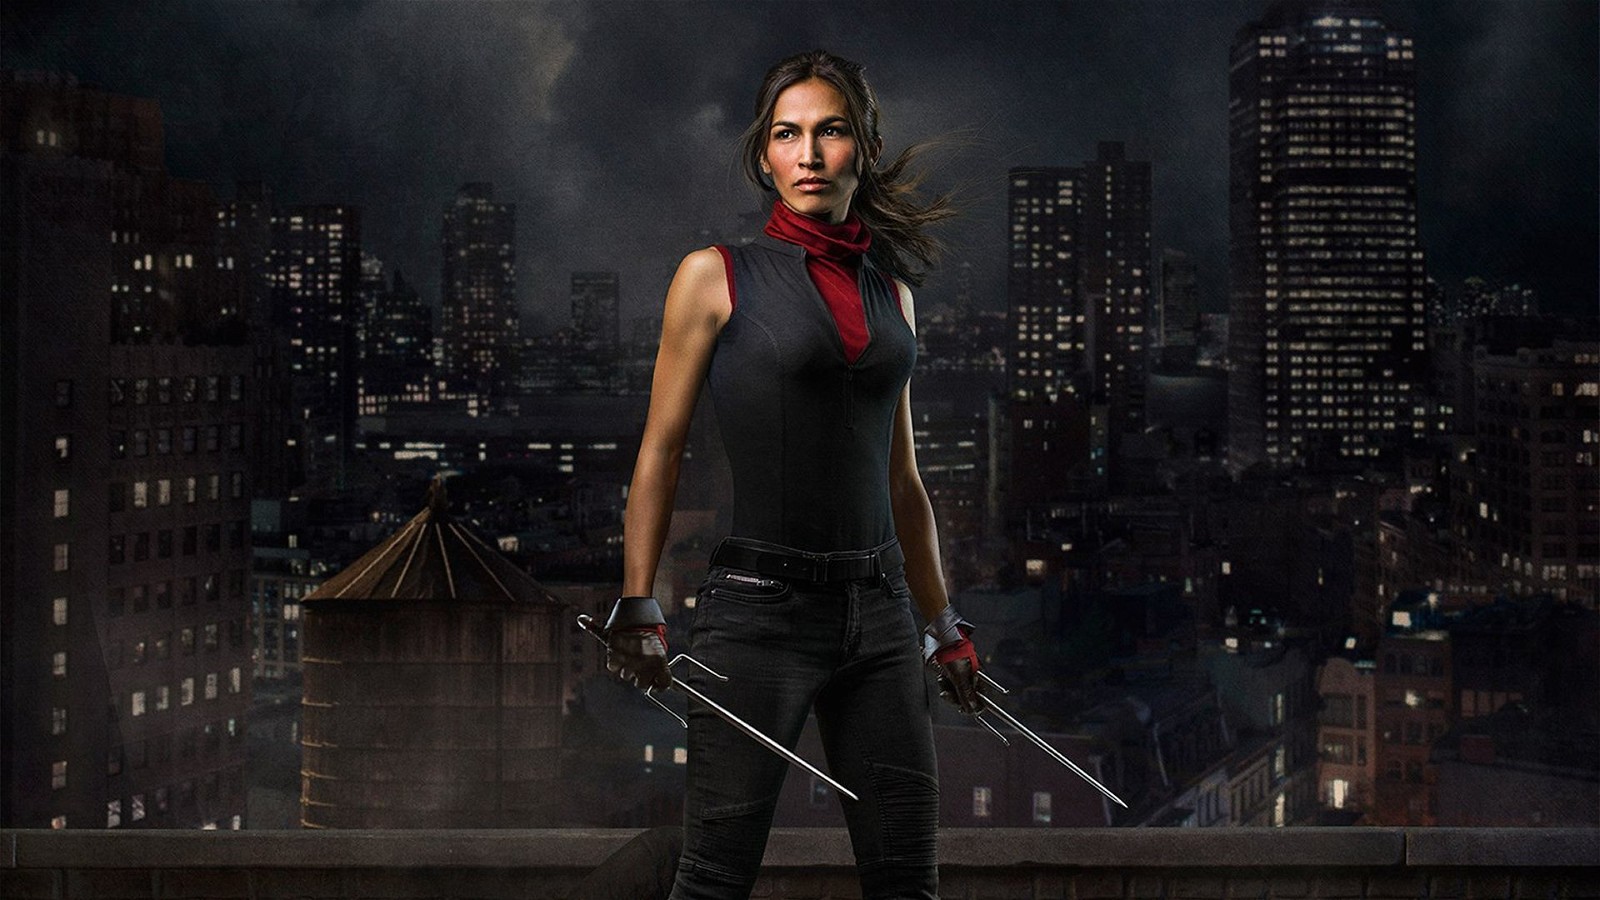 Elodie Yung had portrayed the role of Elektra in Daredevil (2015-2018).